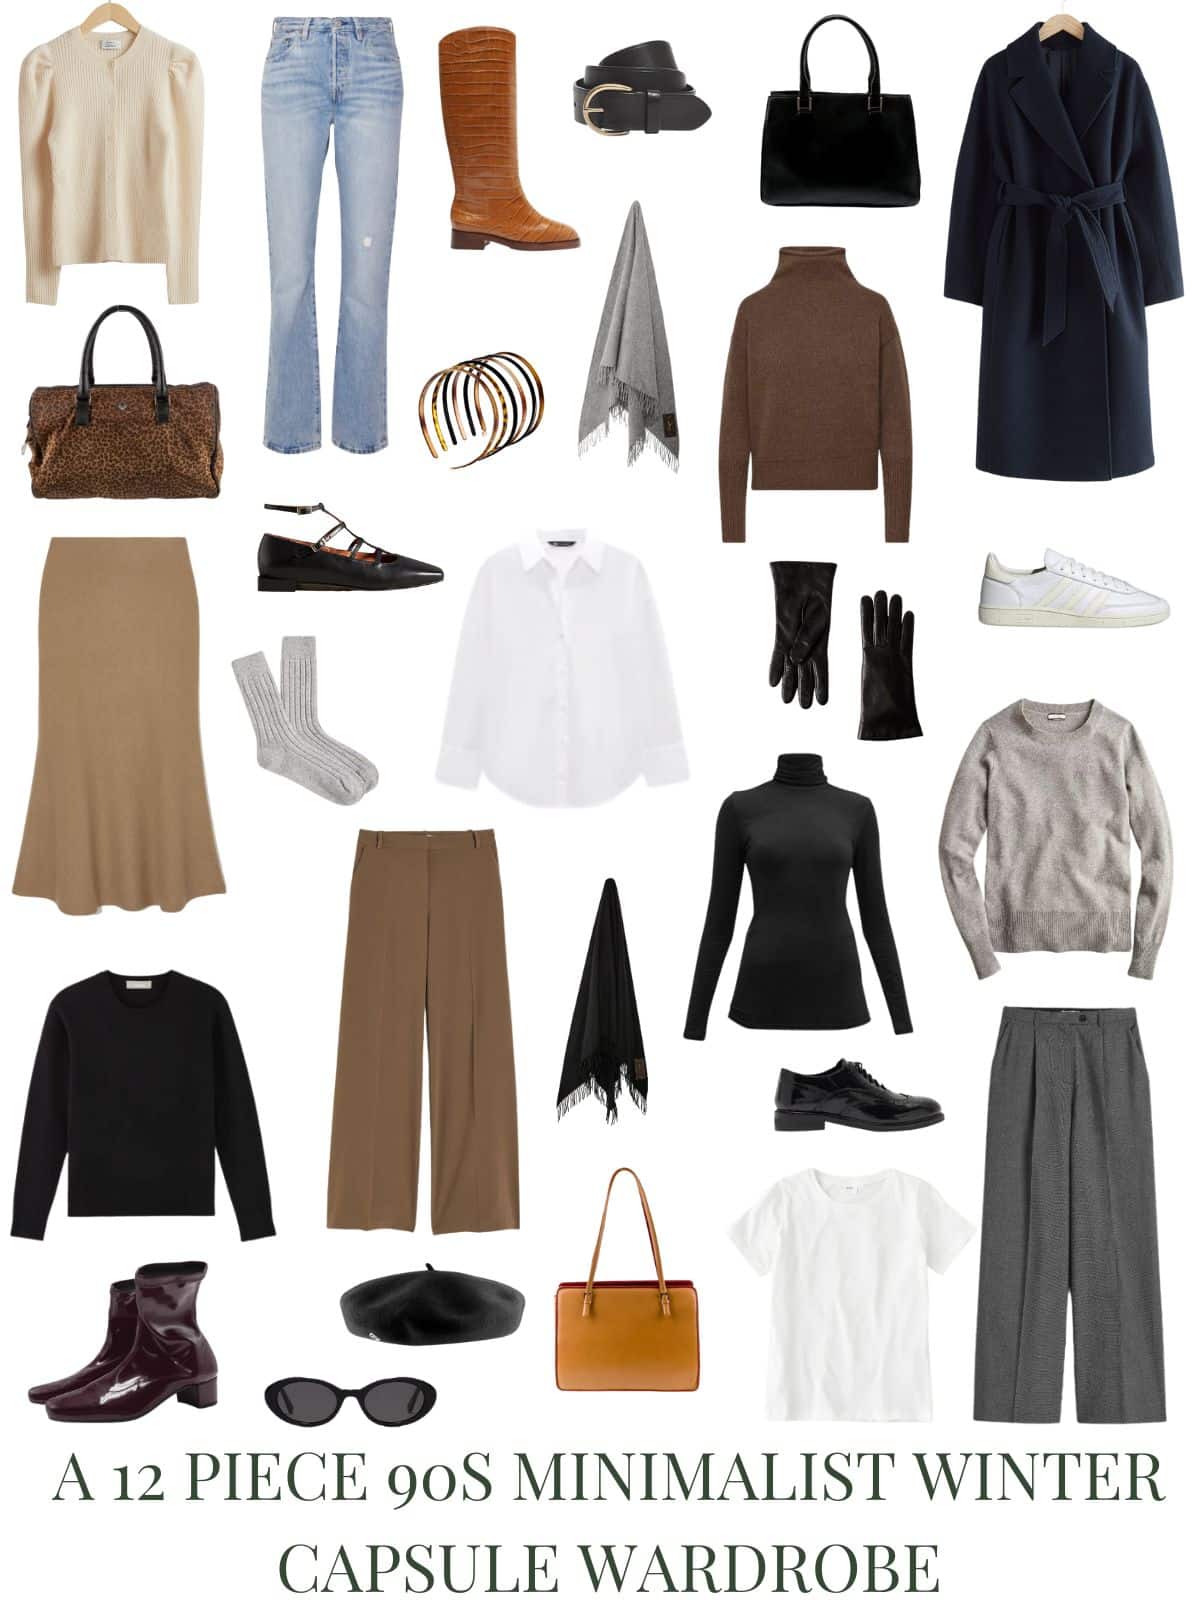 A white background with 12 pieces and accessories for A 12 Piece 90s Minimalist Winter Capsule Wardrobe.